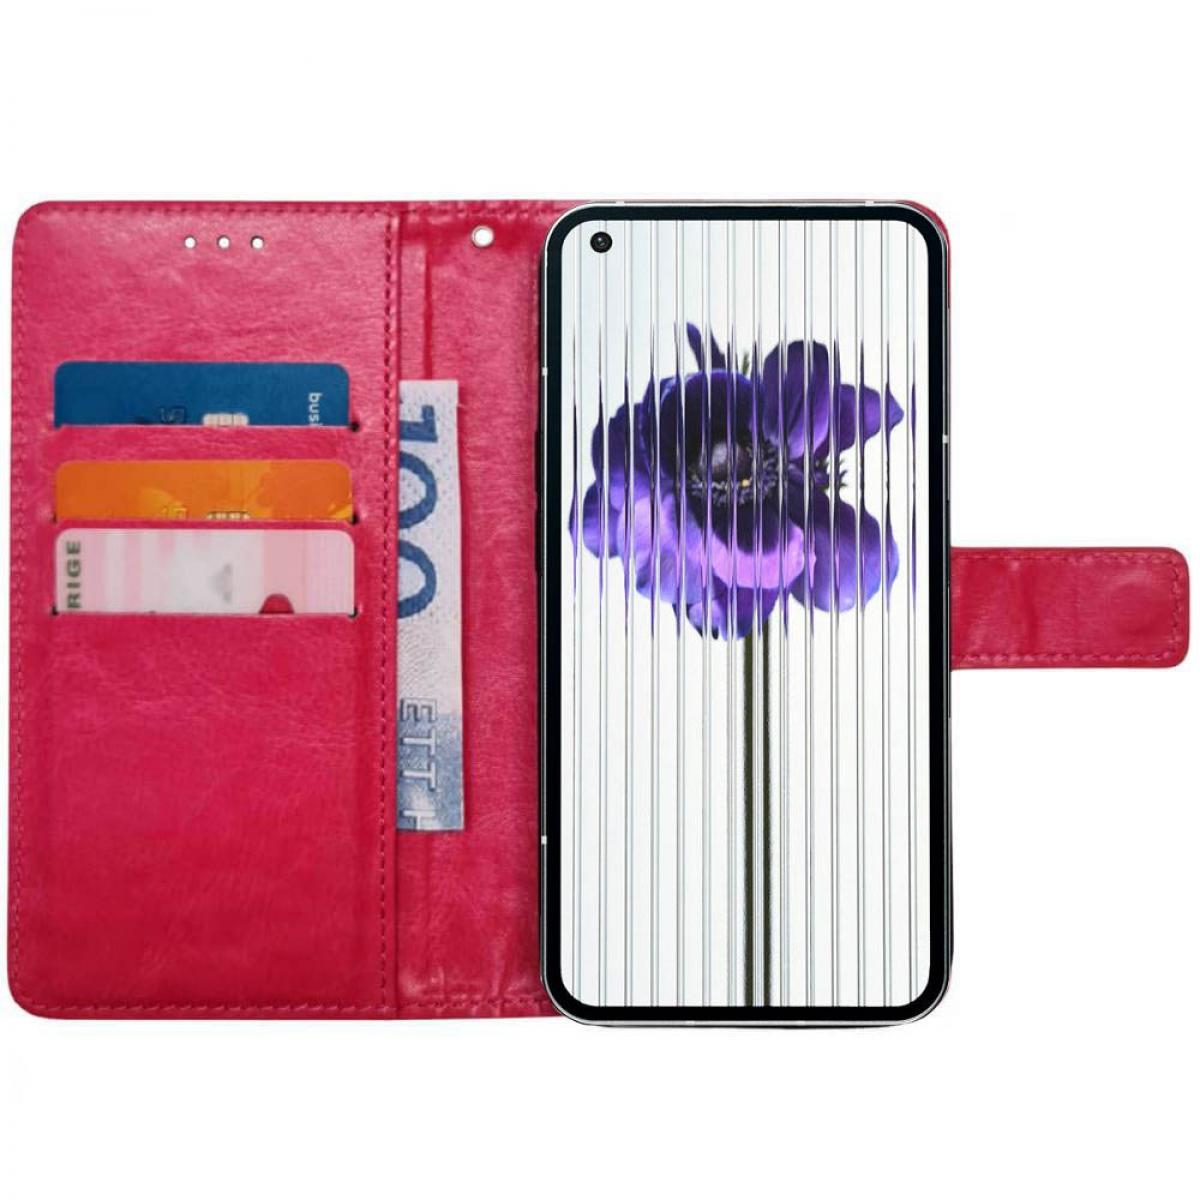 Nothing, Phone CASEONLINE Rosa Bookcover, Klappbare, 1,